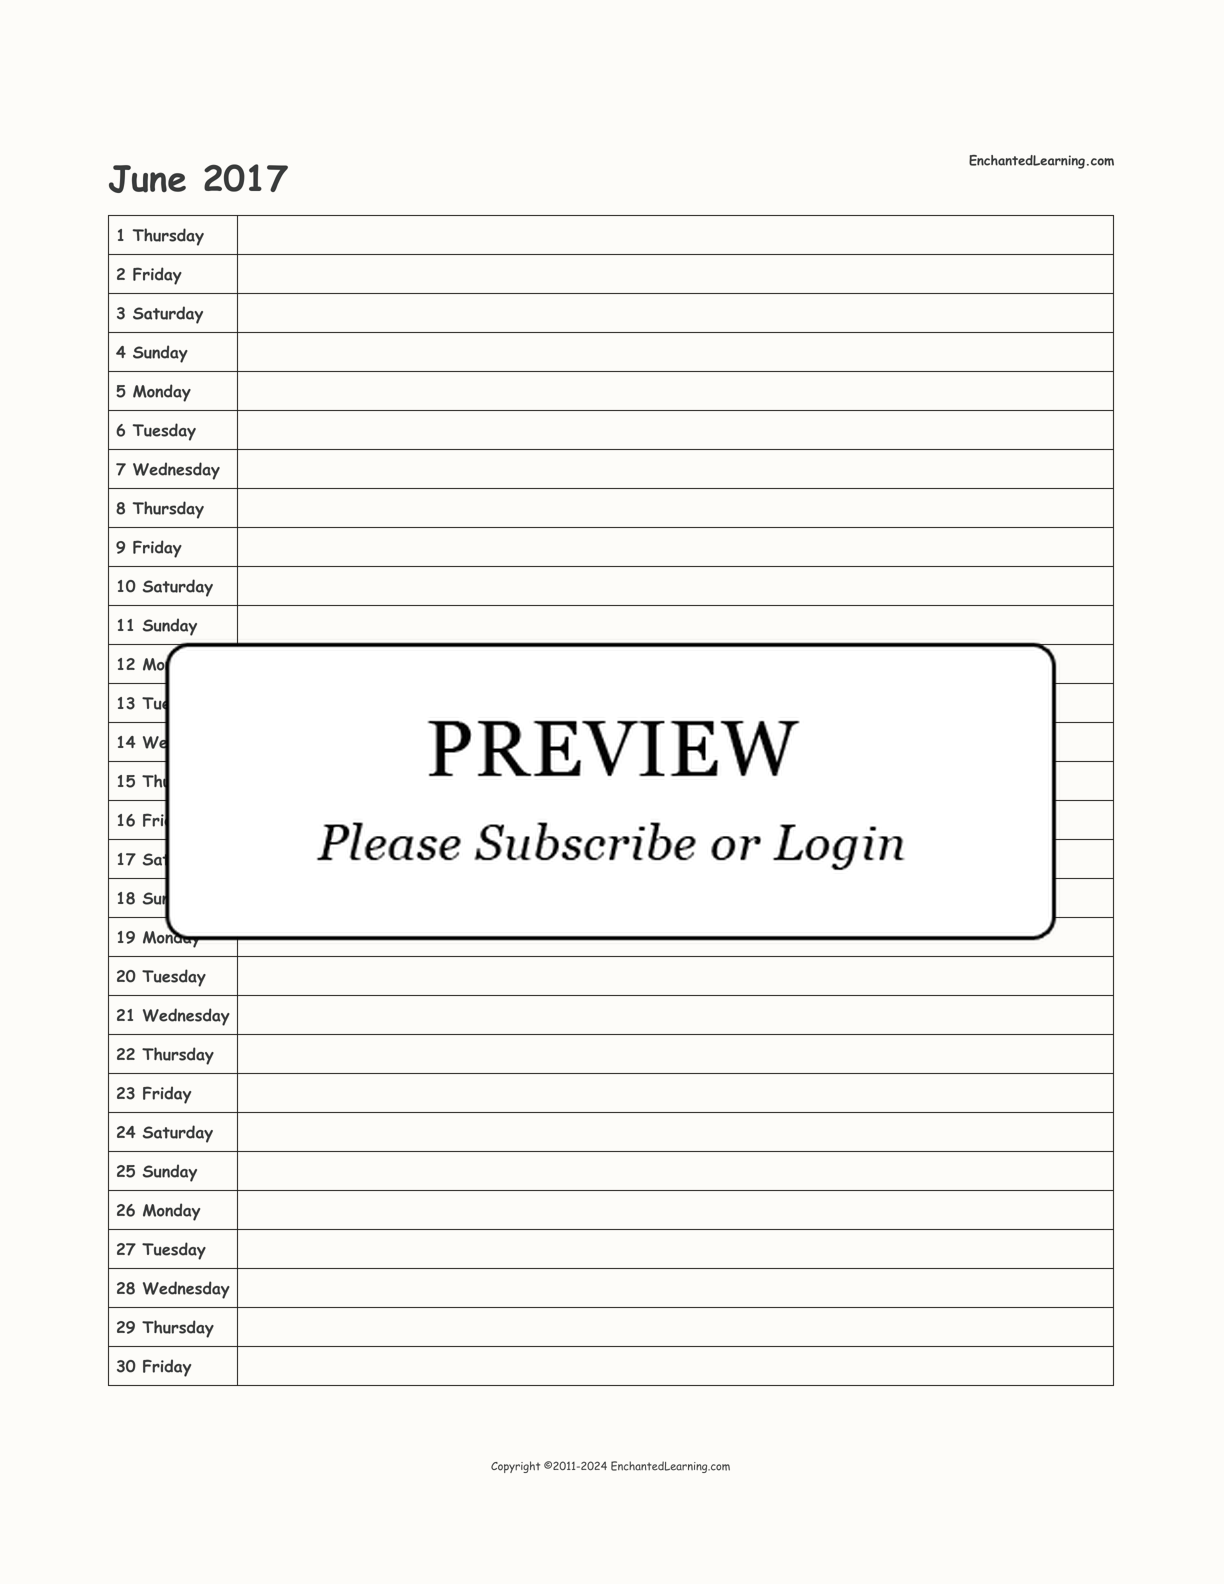 2017 Scheduling Calendar interactive printout page 6